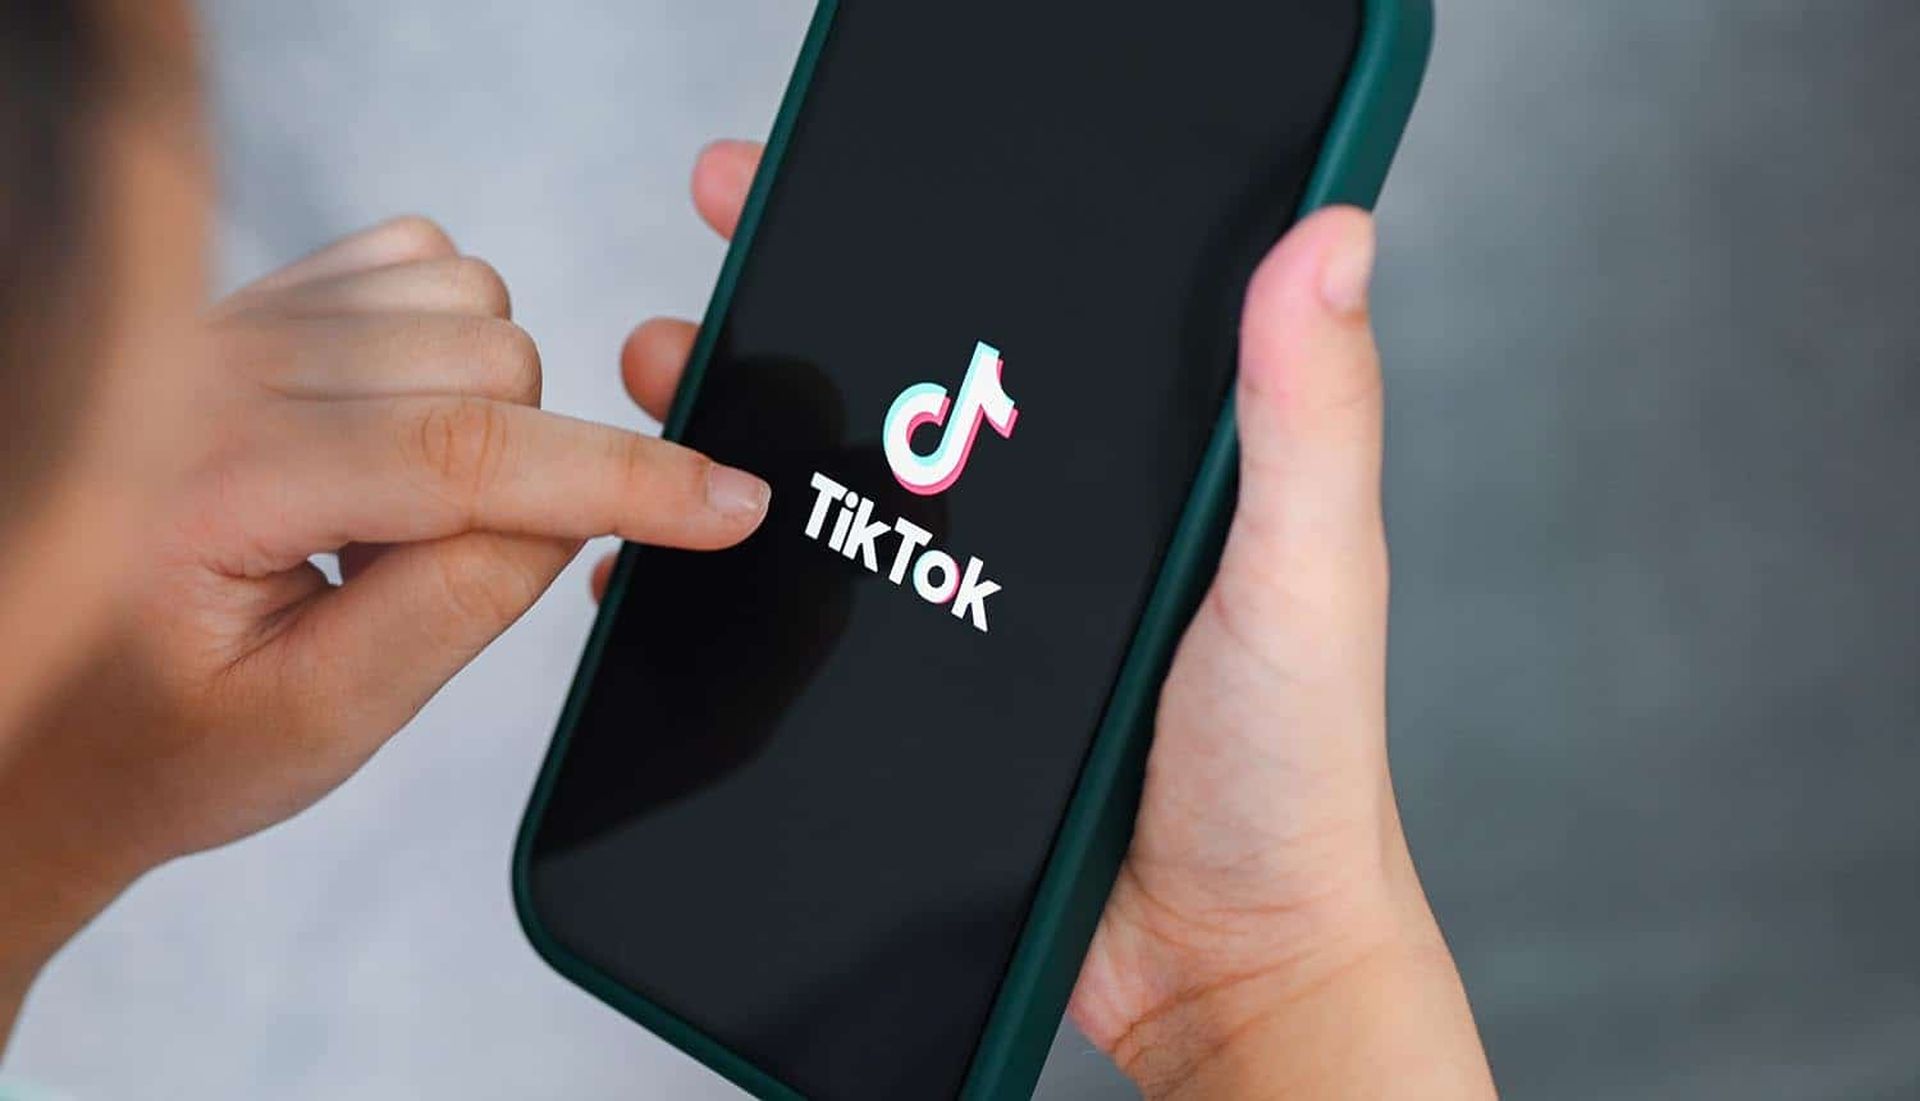 TikTok couldn't load sticker: How to fix it?